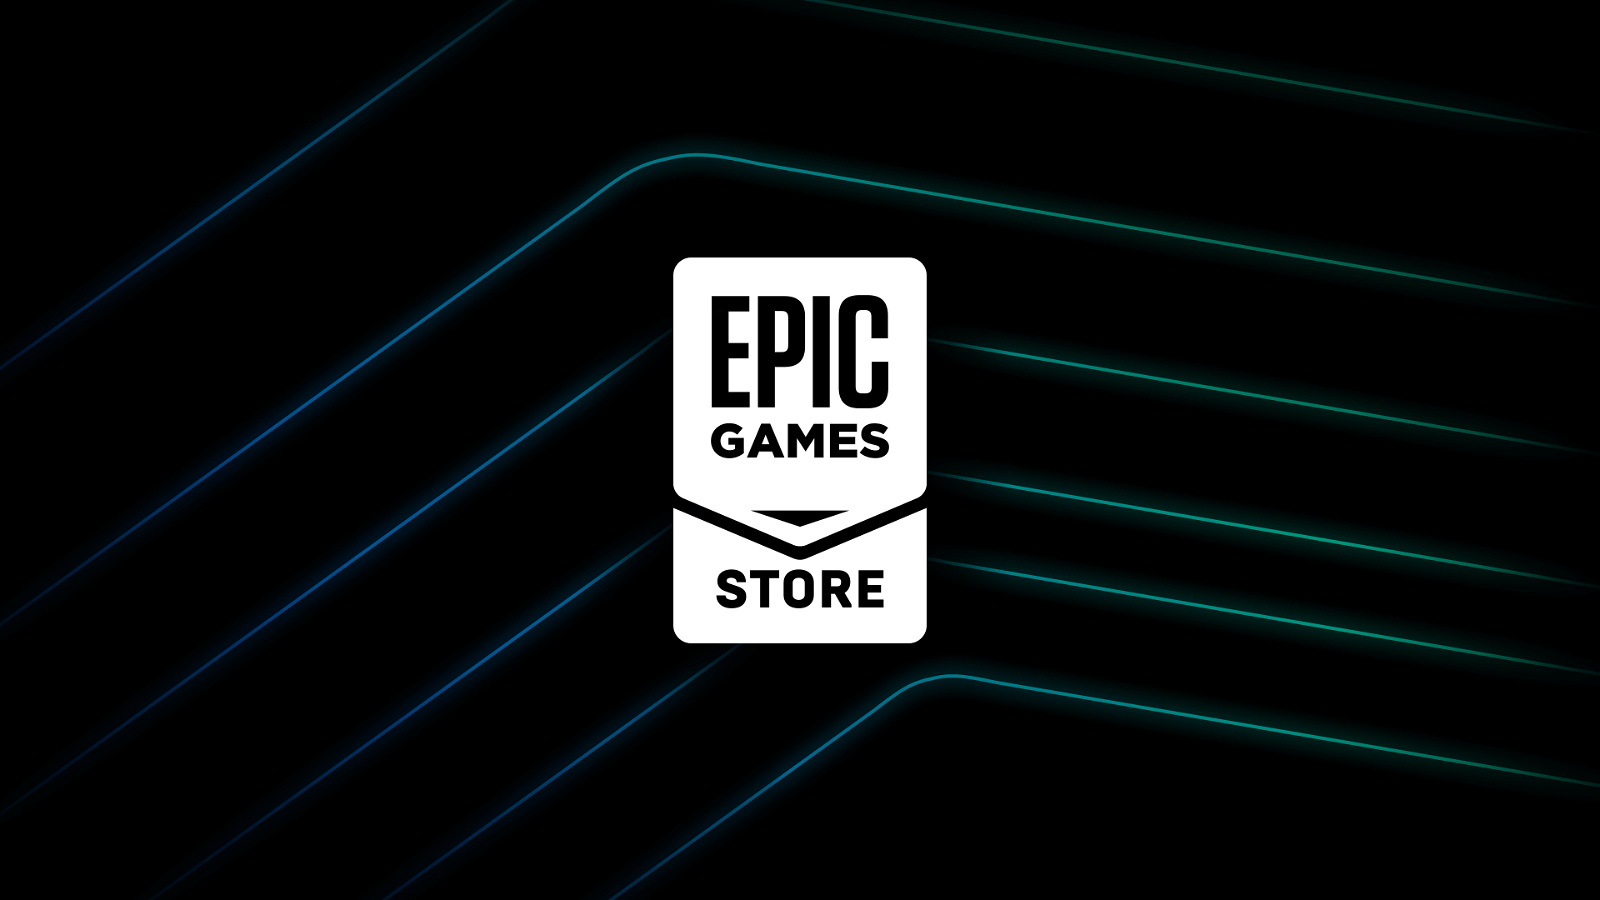 How to Download PC Games - Epic Games Store